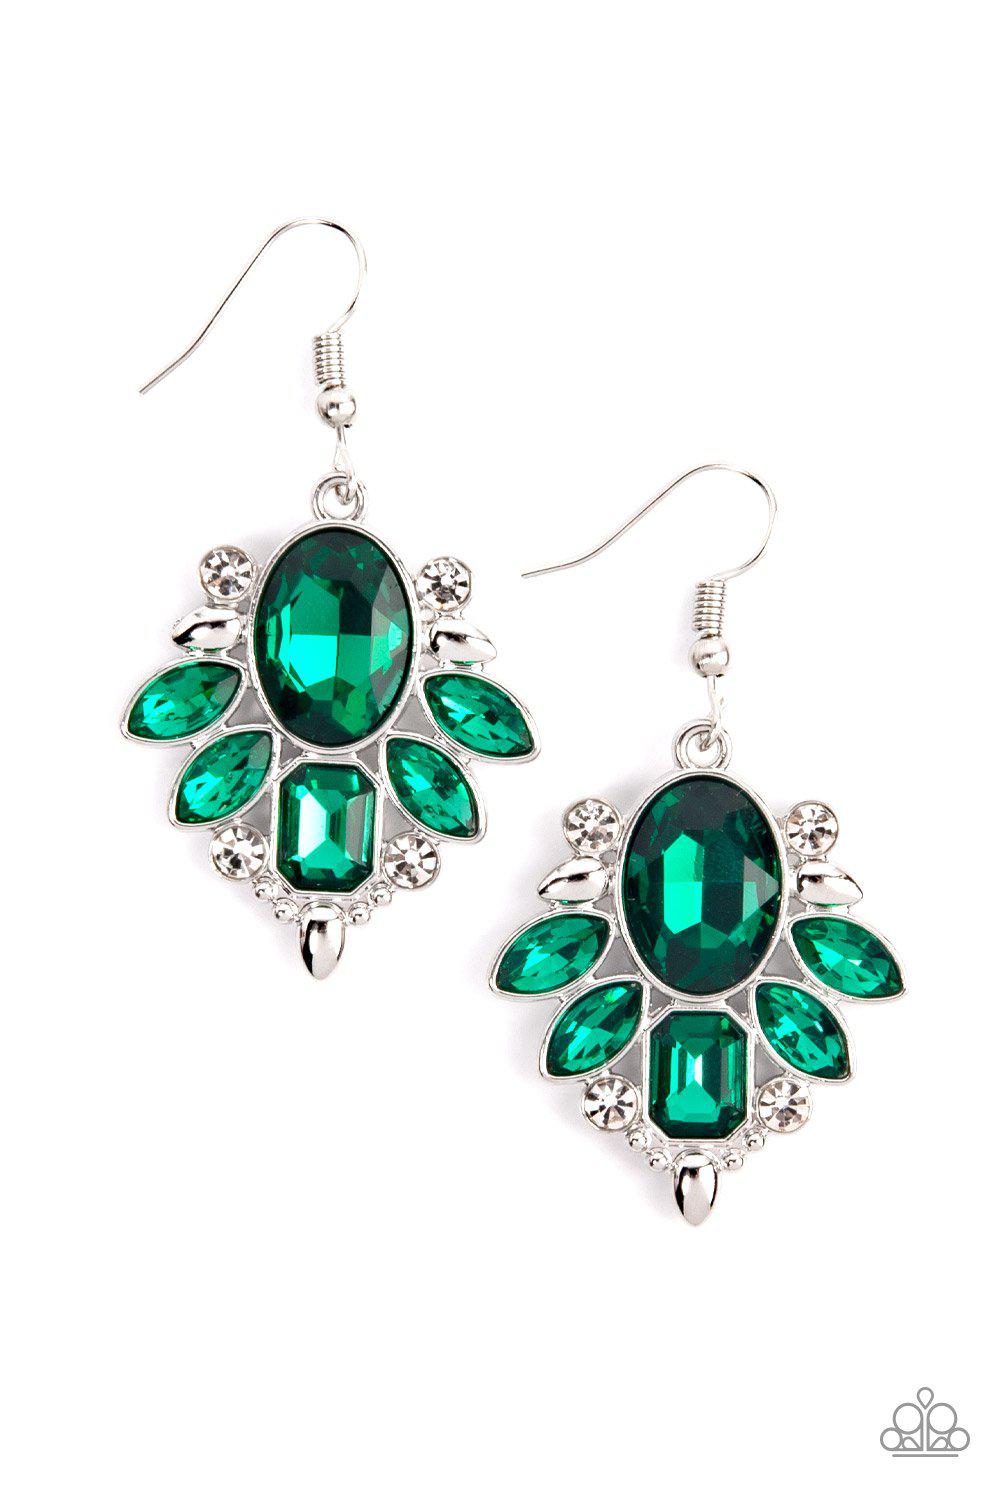 Glitzy Go-Getter Green and White Rhinestone Earrings - Paparazzi Accessories- lightbox - CarasShop.com - $5 Jewelry by Cara Jewels